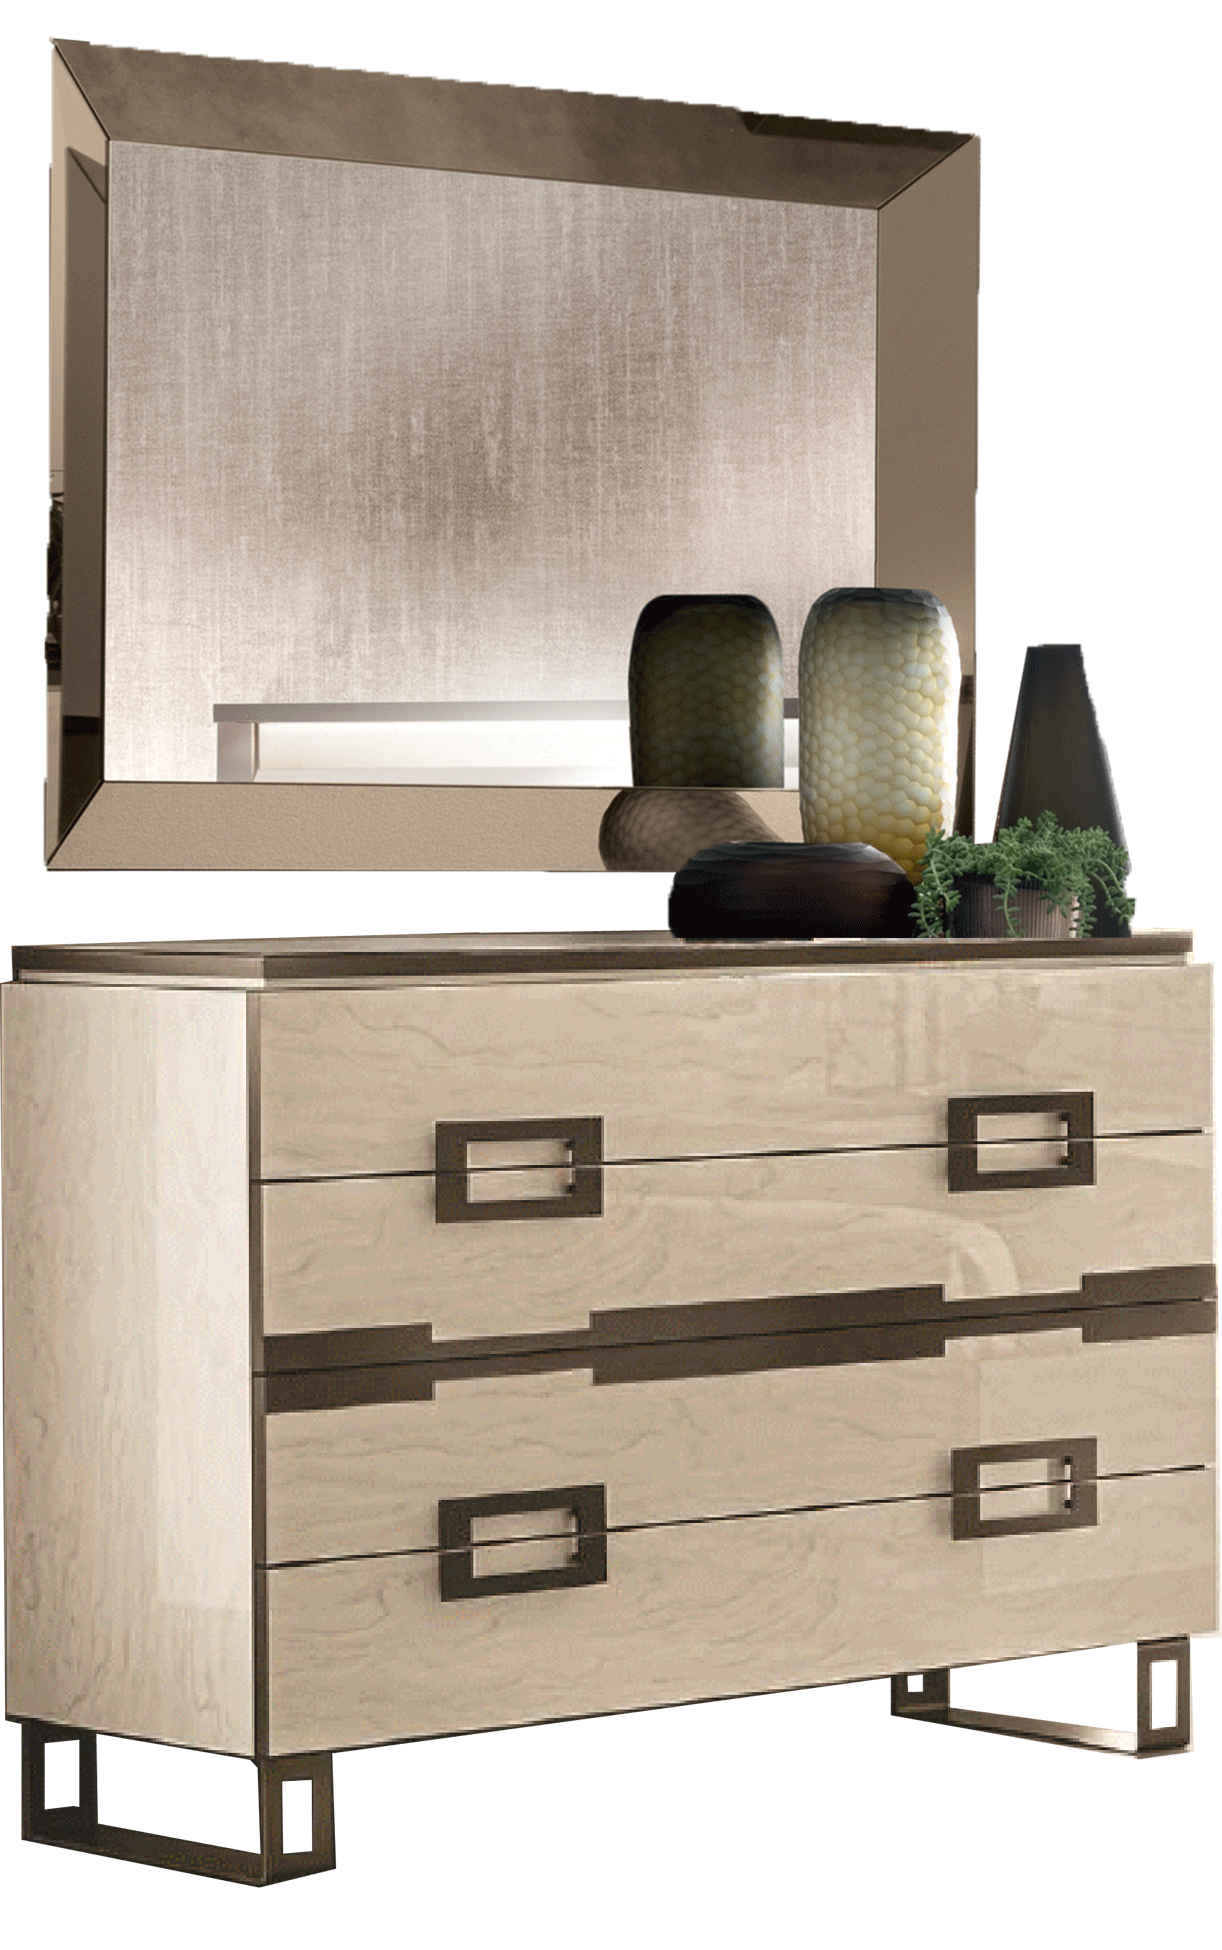 Brands Arredoclassic Dining Room, Italy Poesia Single Dresser / Mirror